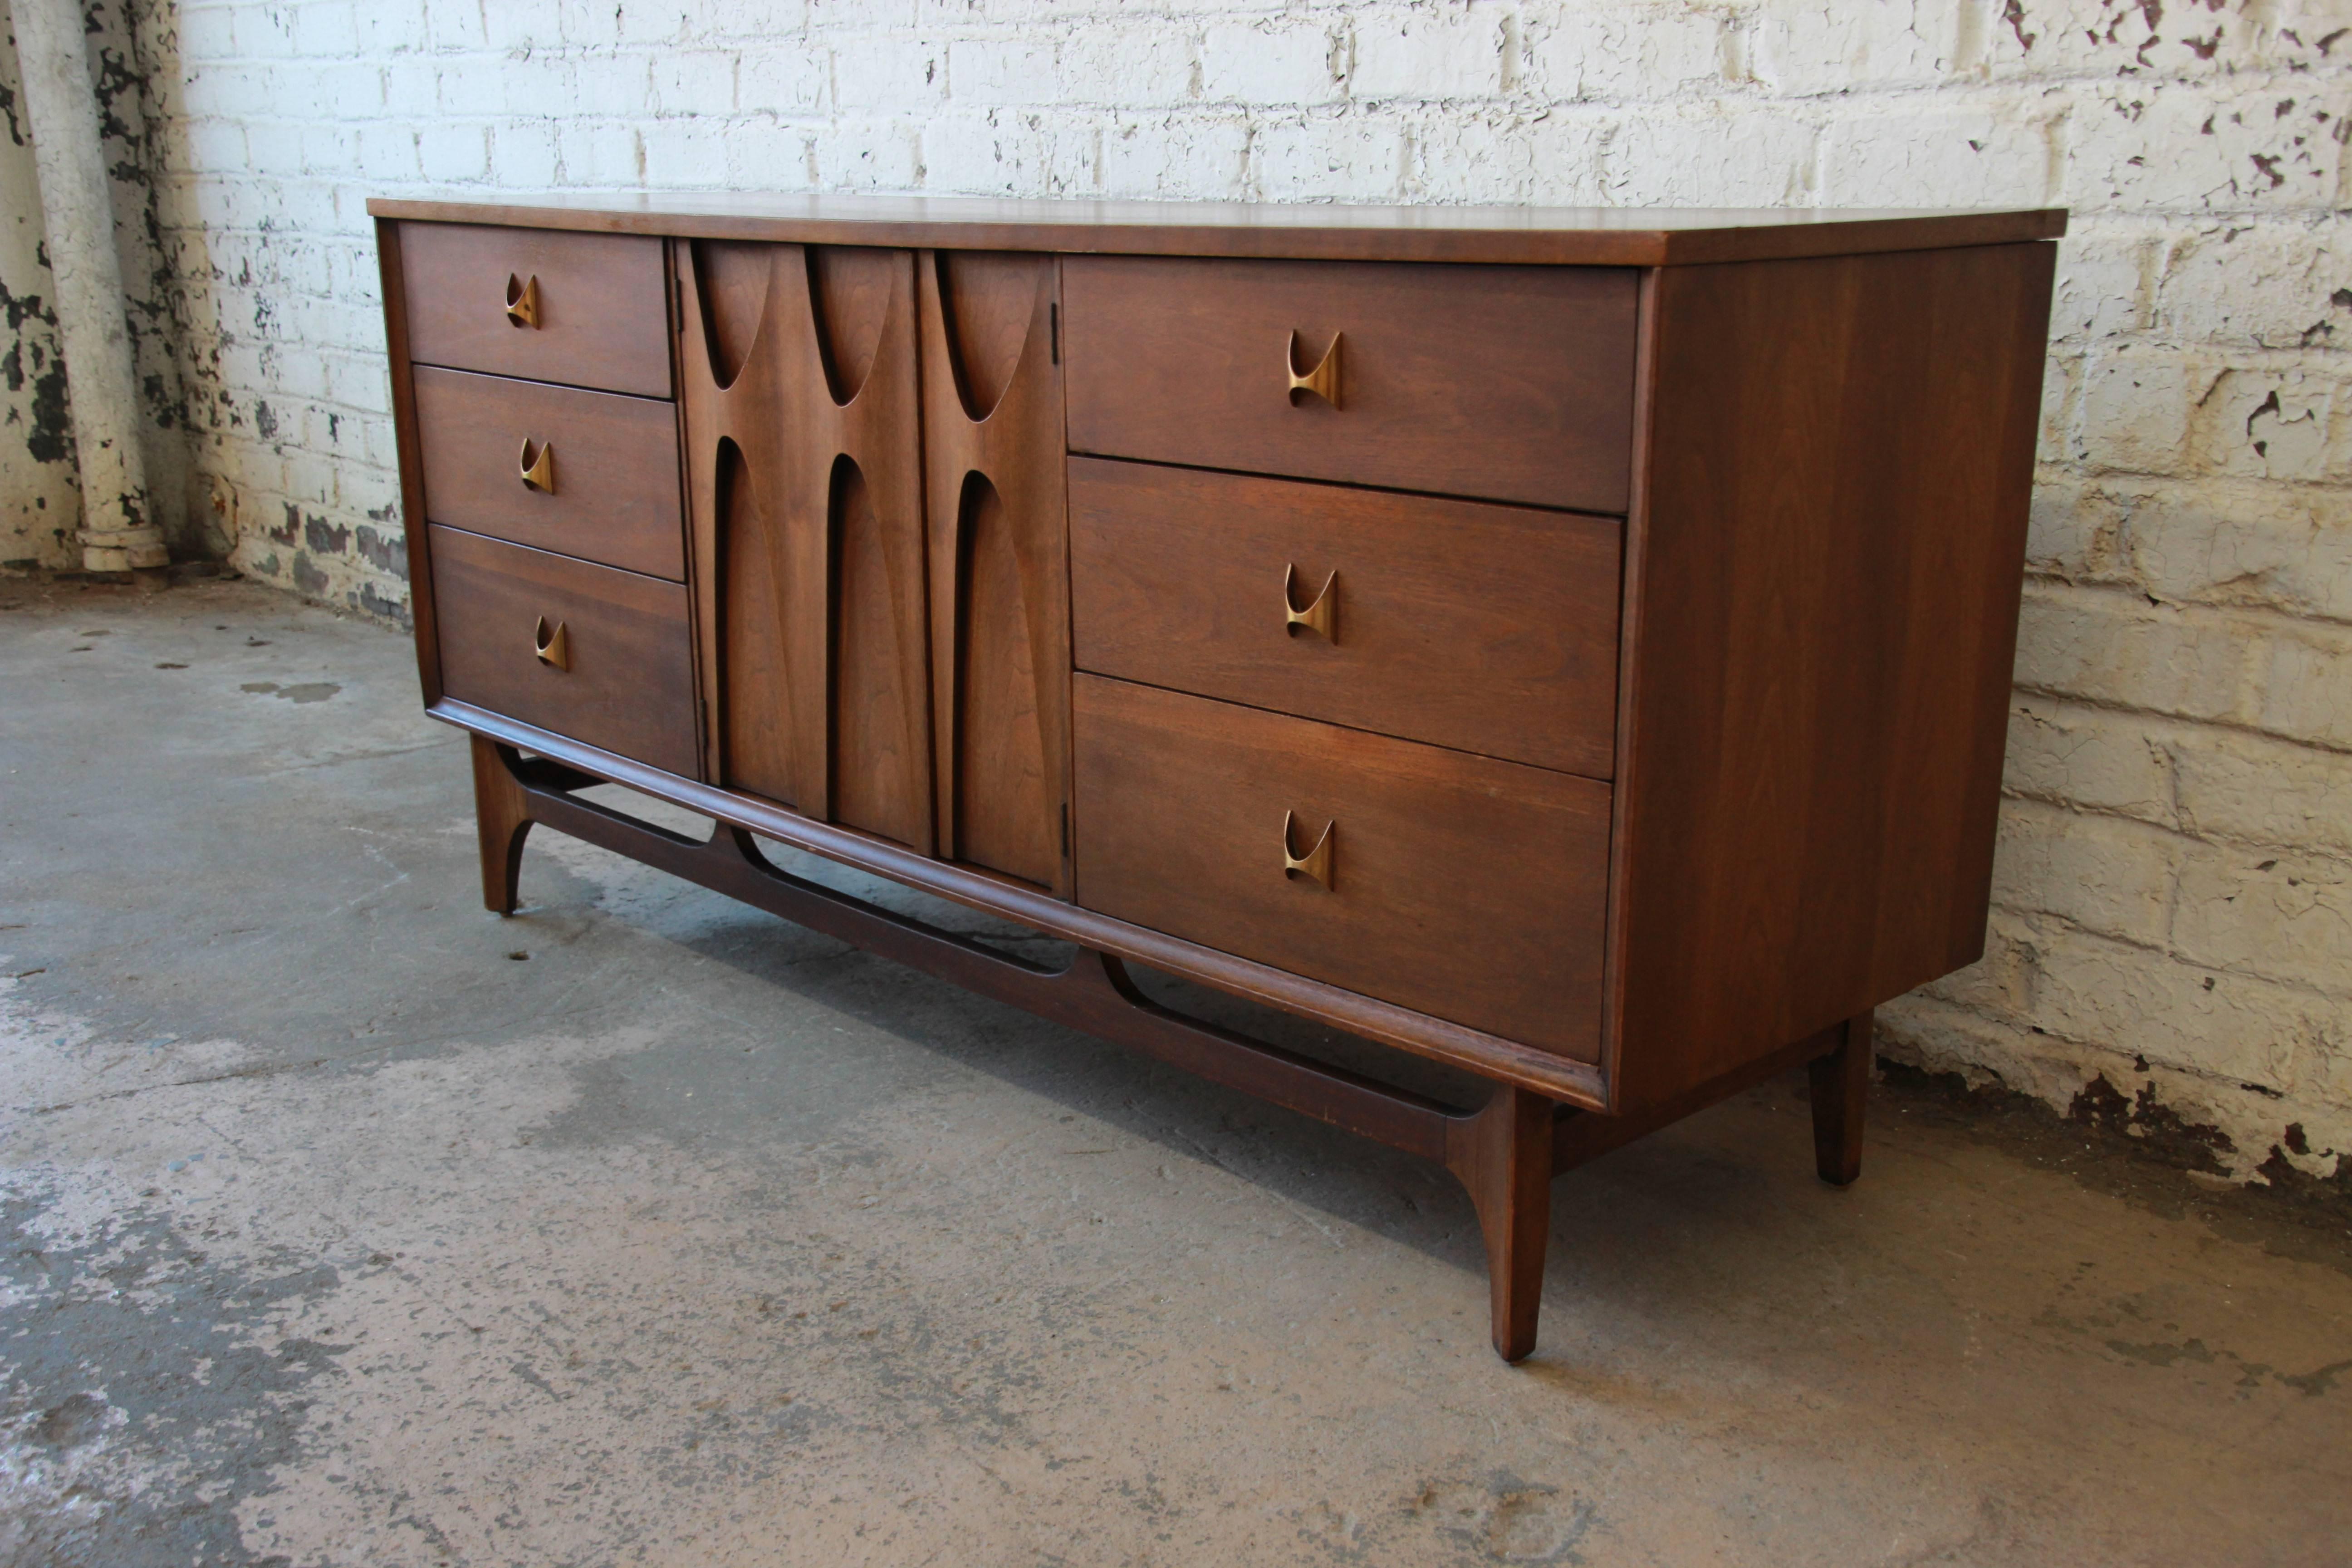 An iconic Broyhill Brasilia Mid-Century Modern sculpted walnut nine-drawer dresser. The dresser features gorgeous walnut wood grain, with sculpted arches and original pulls. The centre sculpted cabinet doors open up to three drawers with an